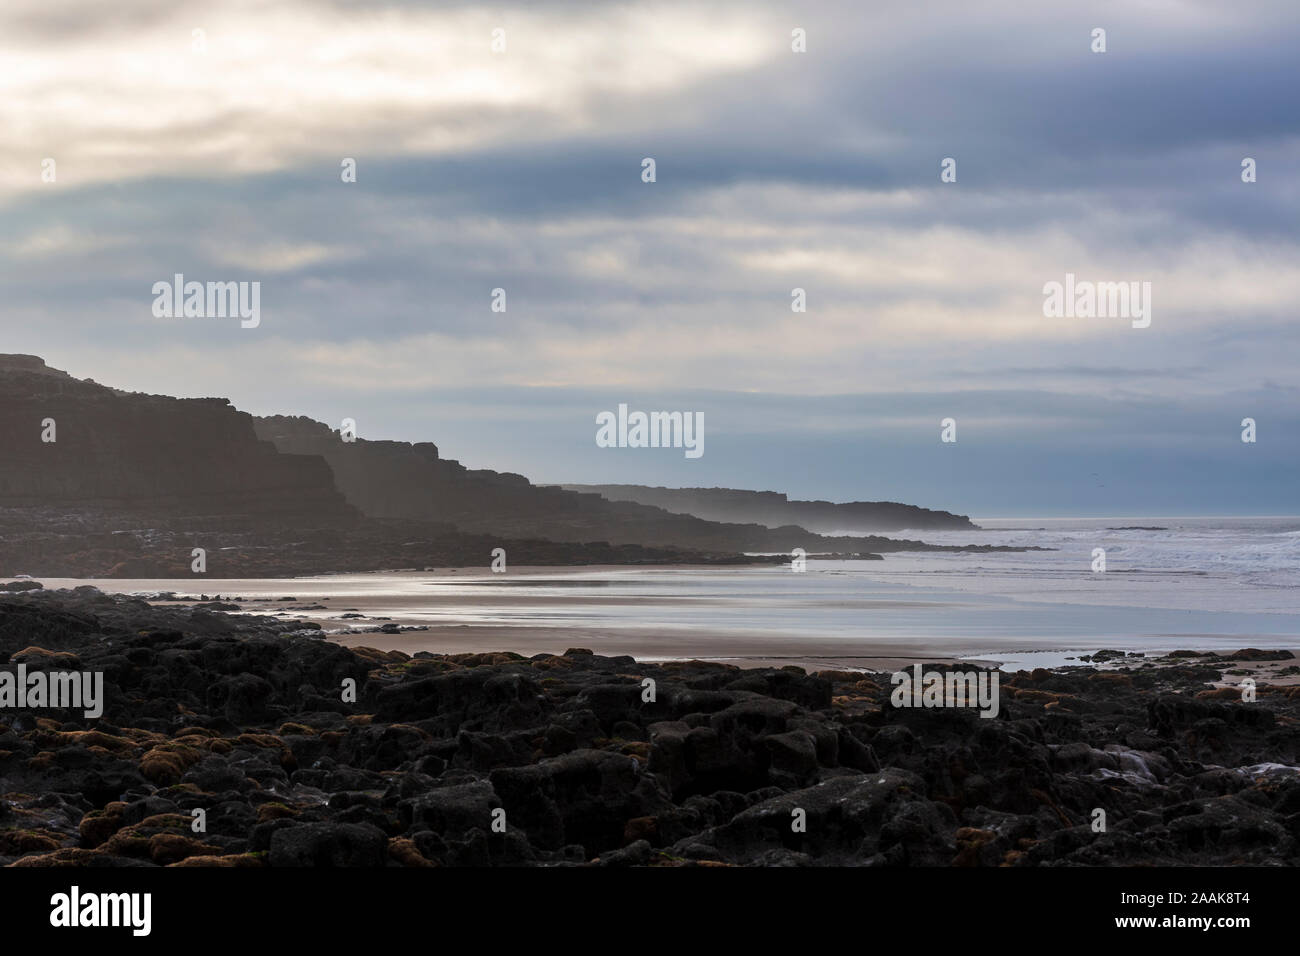 Atmospheric view of the rocks, beach and sea at Rest Bay in Porthcawl, Wales, UK. Stock Photo